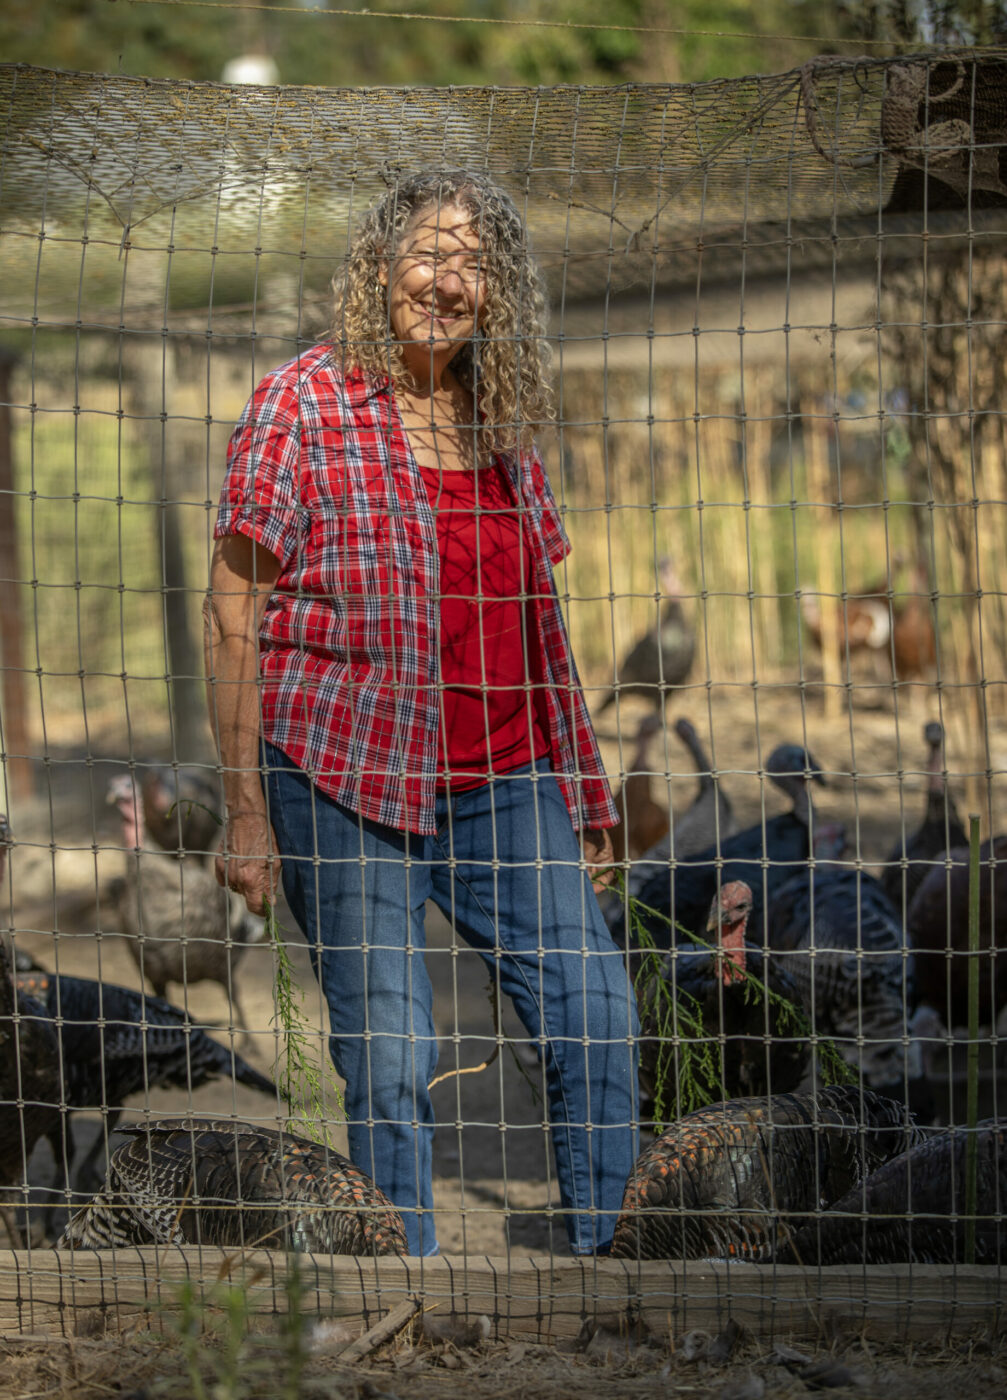 Catherine Thode feeds her 75 turkeys on her farm in a pen that is about 50 by 50 feet with a fence and netting on top to keep out predators, in the middle of a field of her Sebastopol farm September 14, 2023. (Chad Surmick / The Press Democrat)